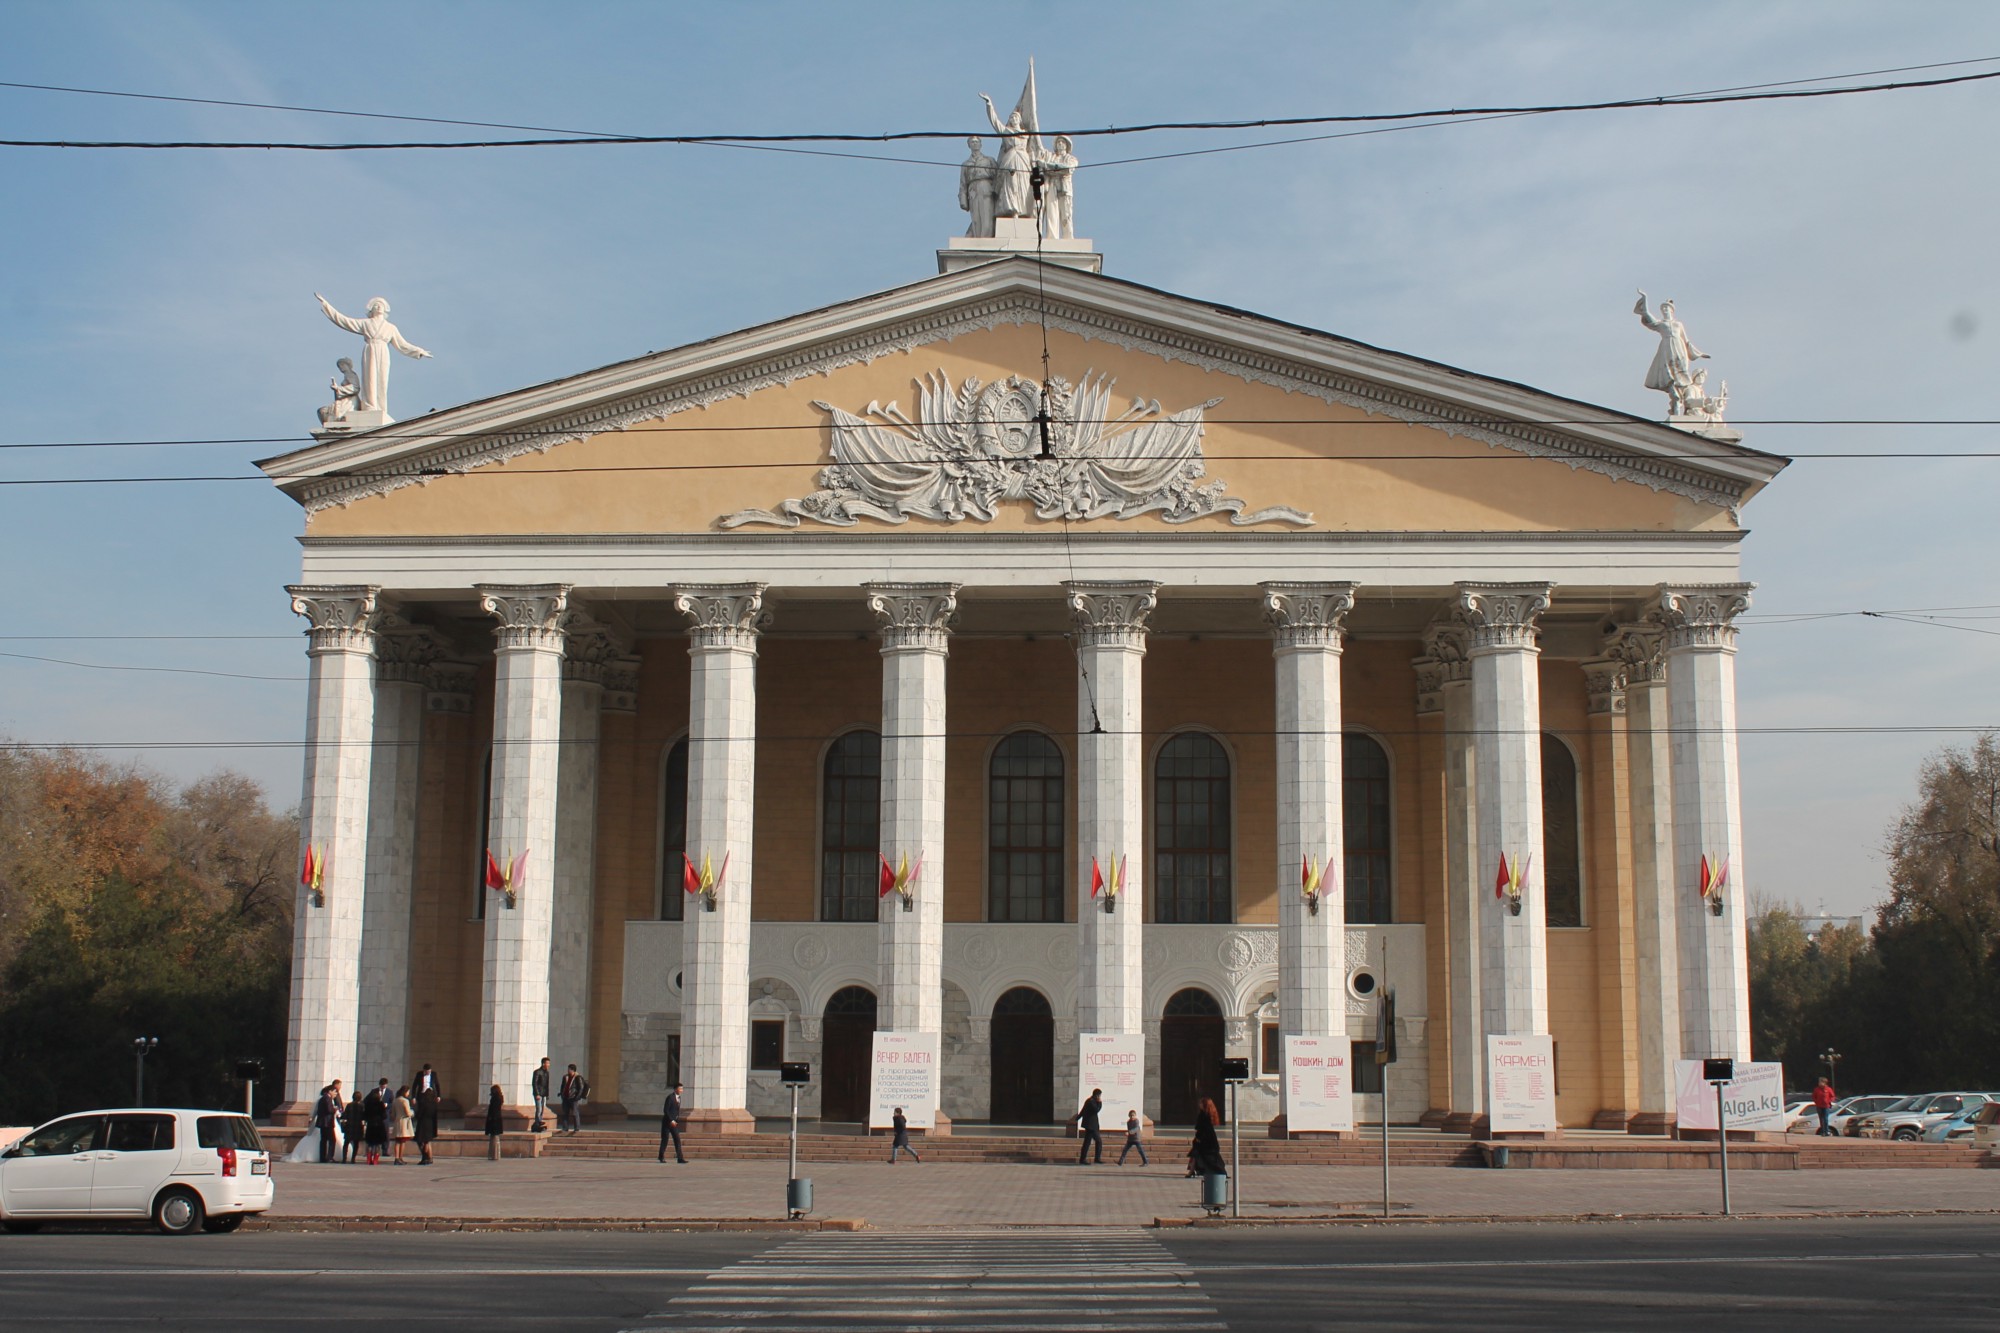 Facade of the Kyrgyz National State Opera and Ballet Theater.